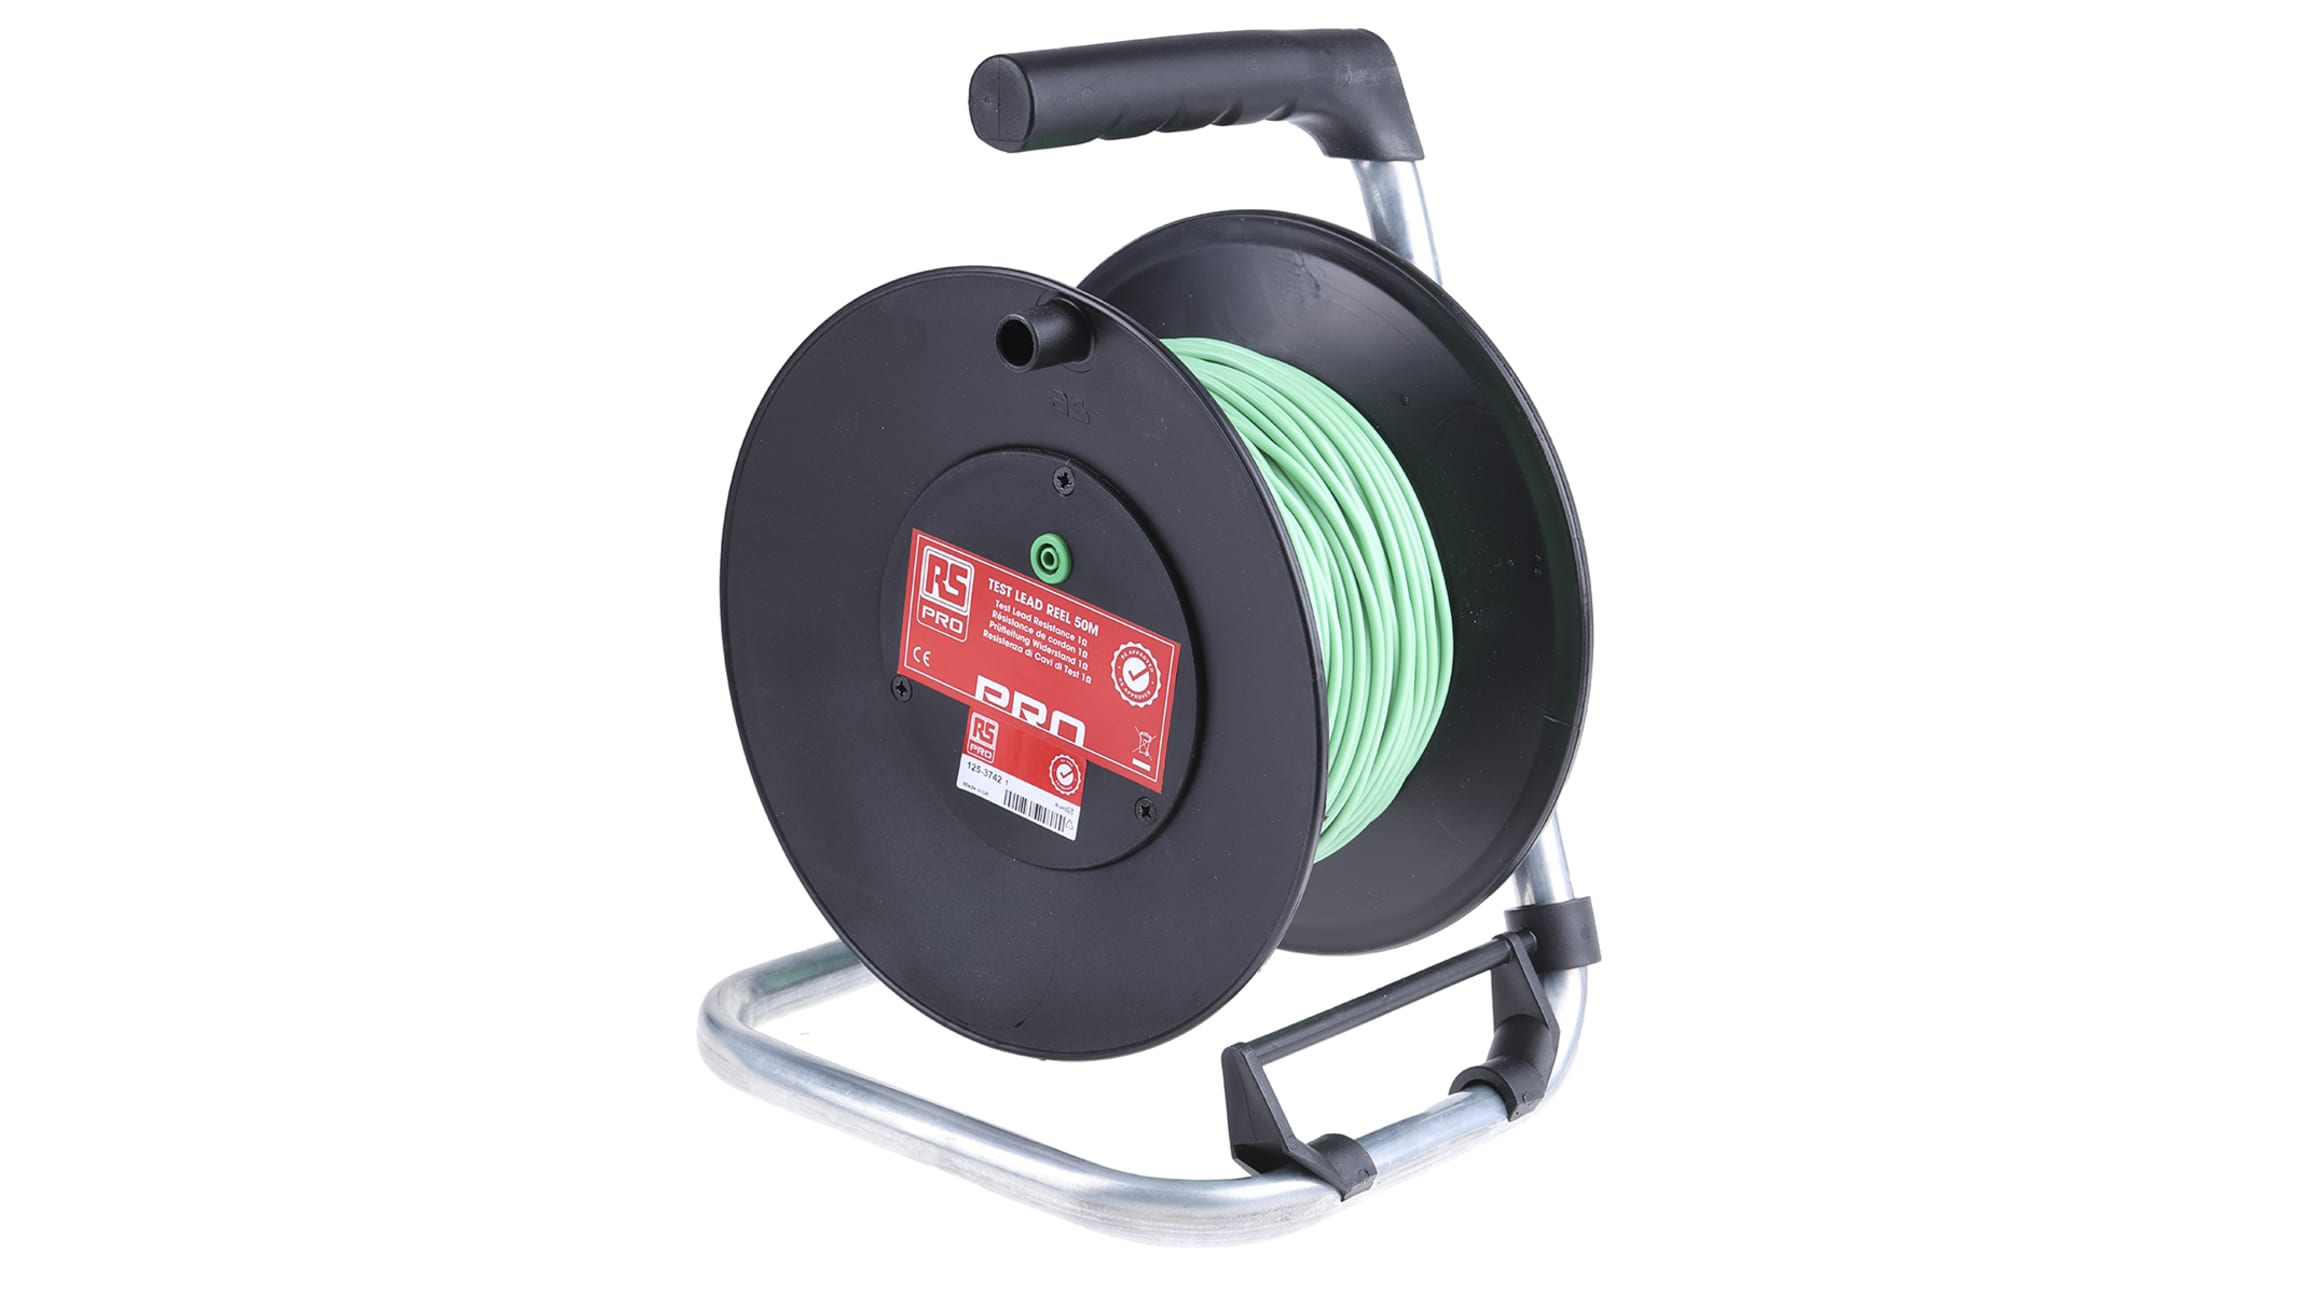 RS PRO Green Test Lead Extension Reel, 50m Cable Length, CAT II 1000 V  safety category